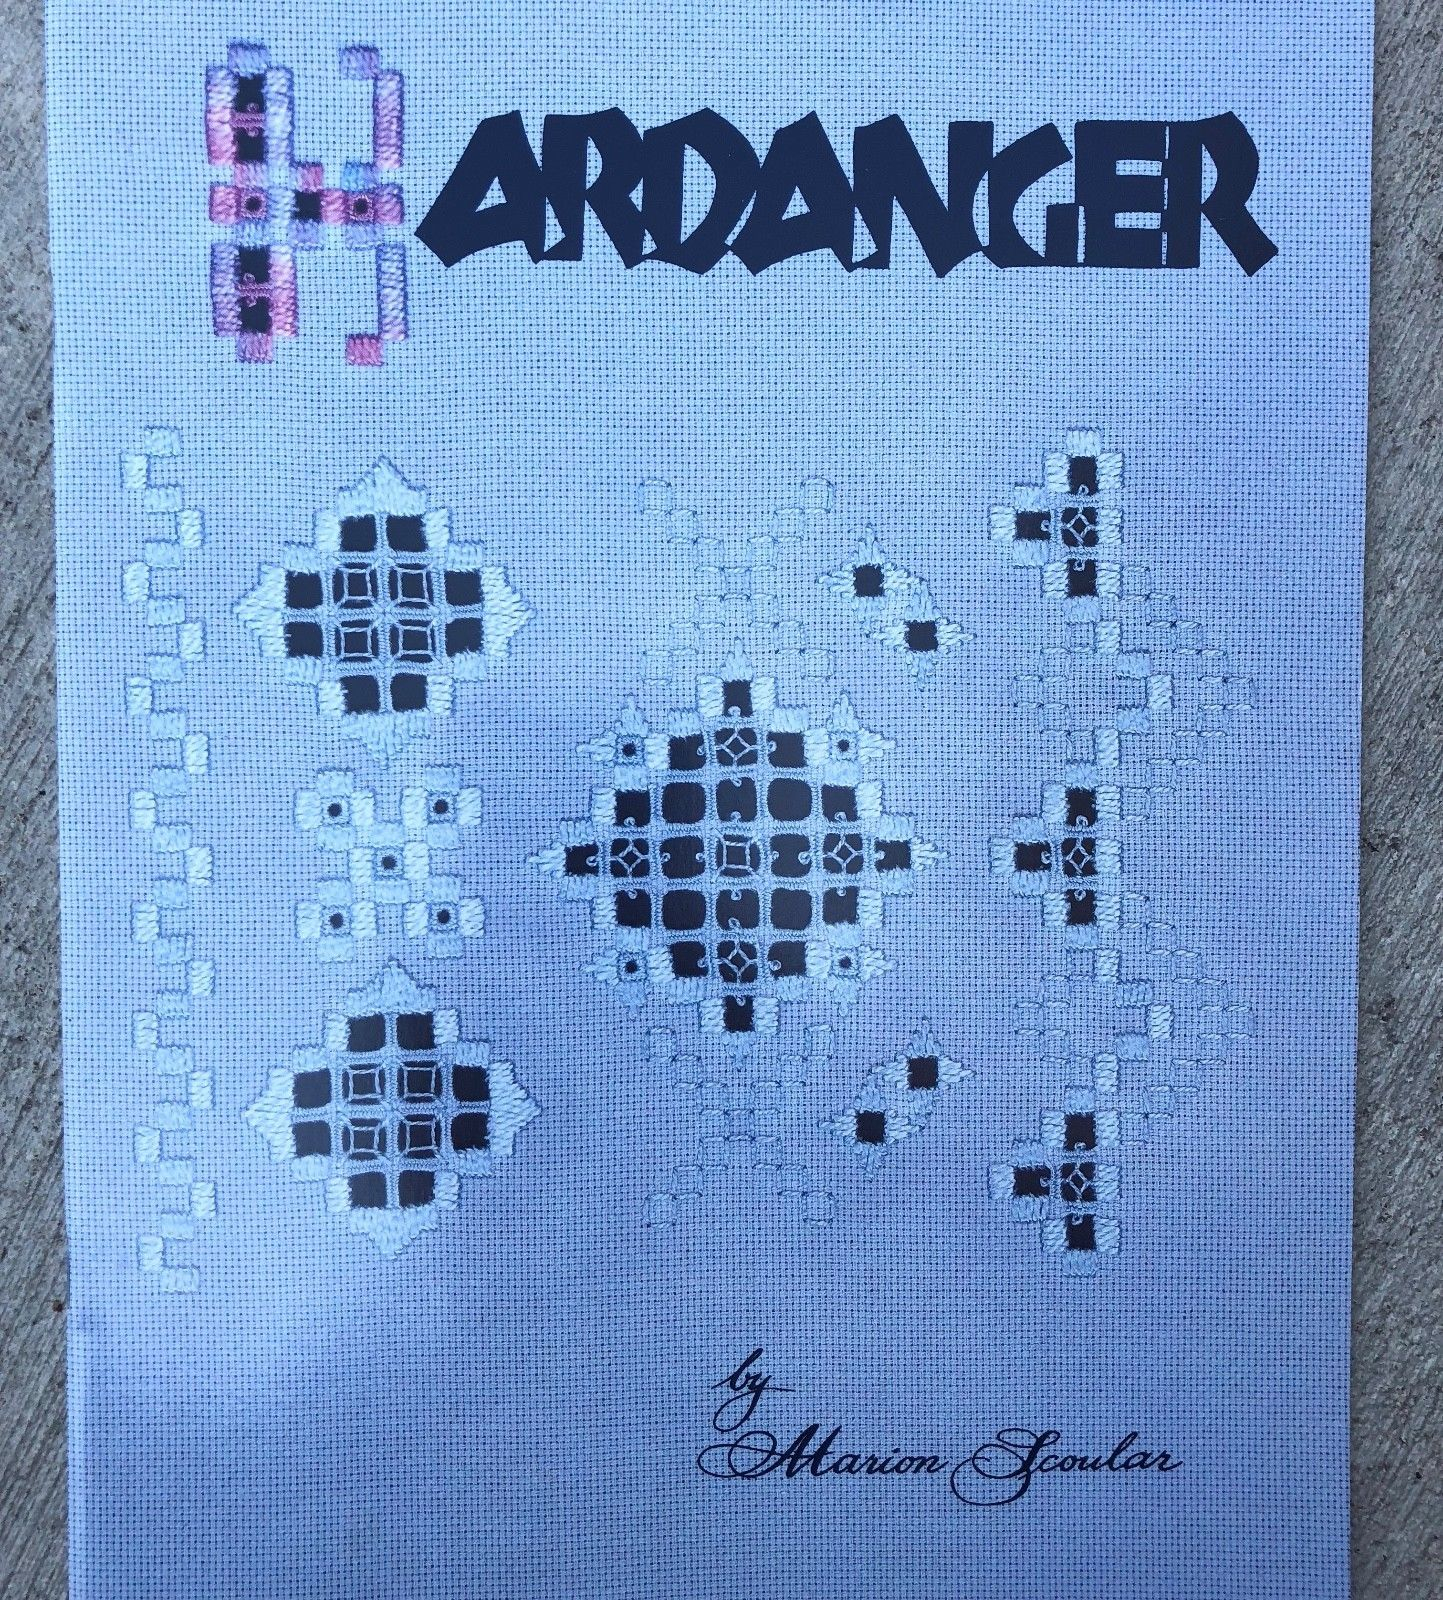 Hardanger Embroidery Patterns Hardanger Embroidery Book Marion Scoular And 23 Similar Items